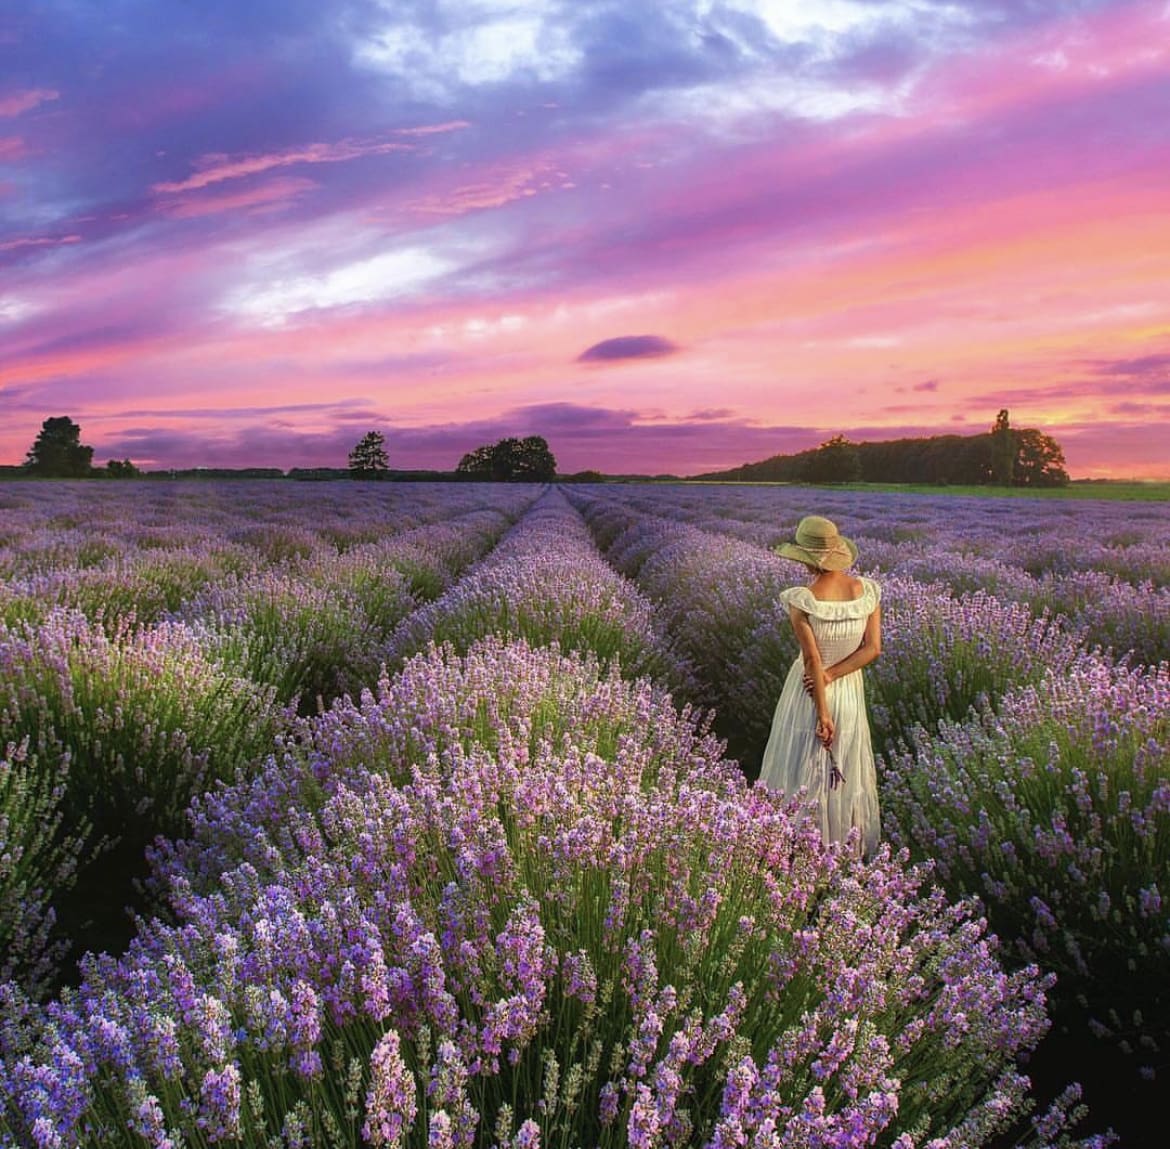 Mont Ventoux - The 10 Best Places to See Lavender Fields in Provence